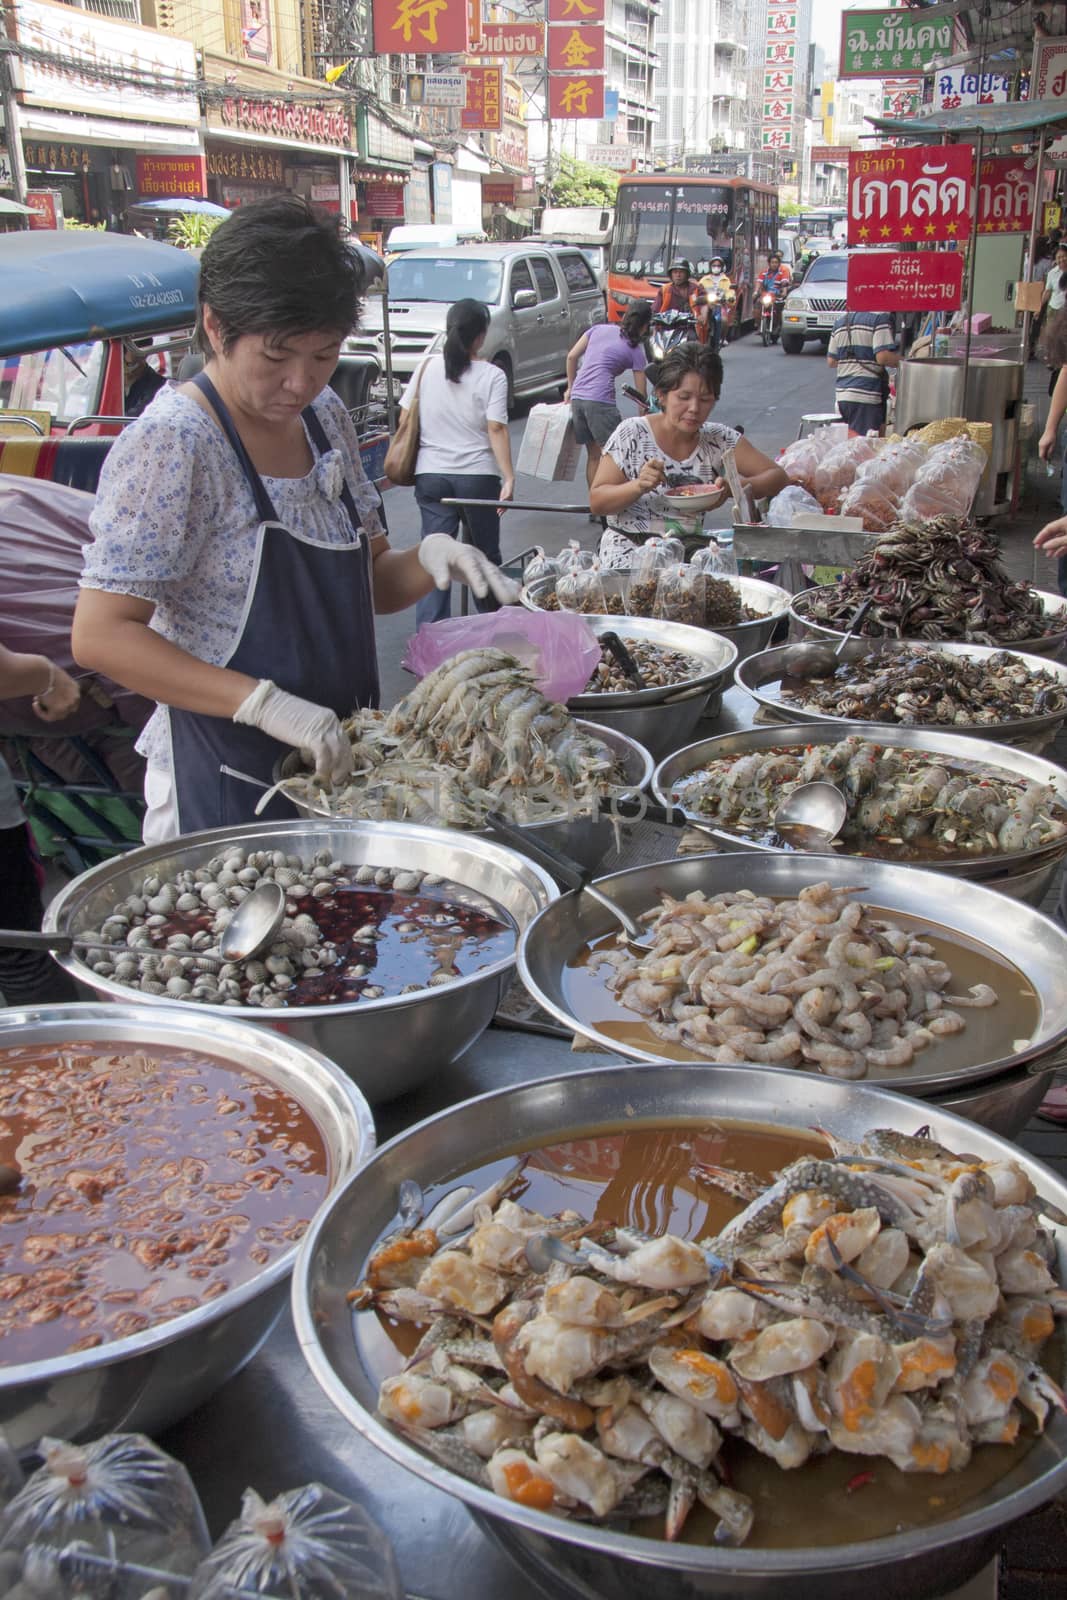 Bangkok, Thailand-December 7th 2011: A woman serves seafood on a stall in Chinatown. Chinatown is one of the oldest areas in Bangkok.